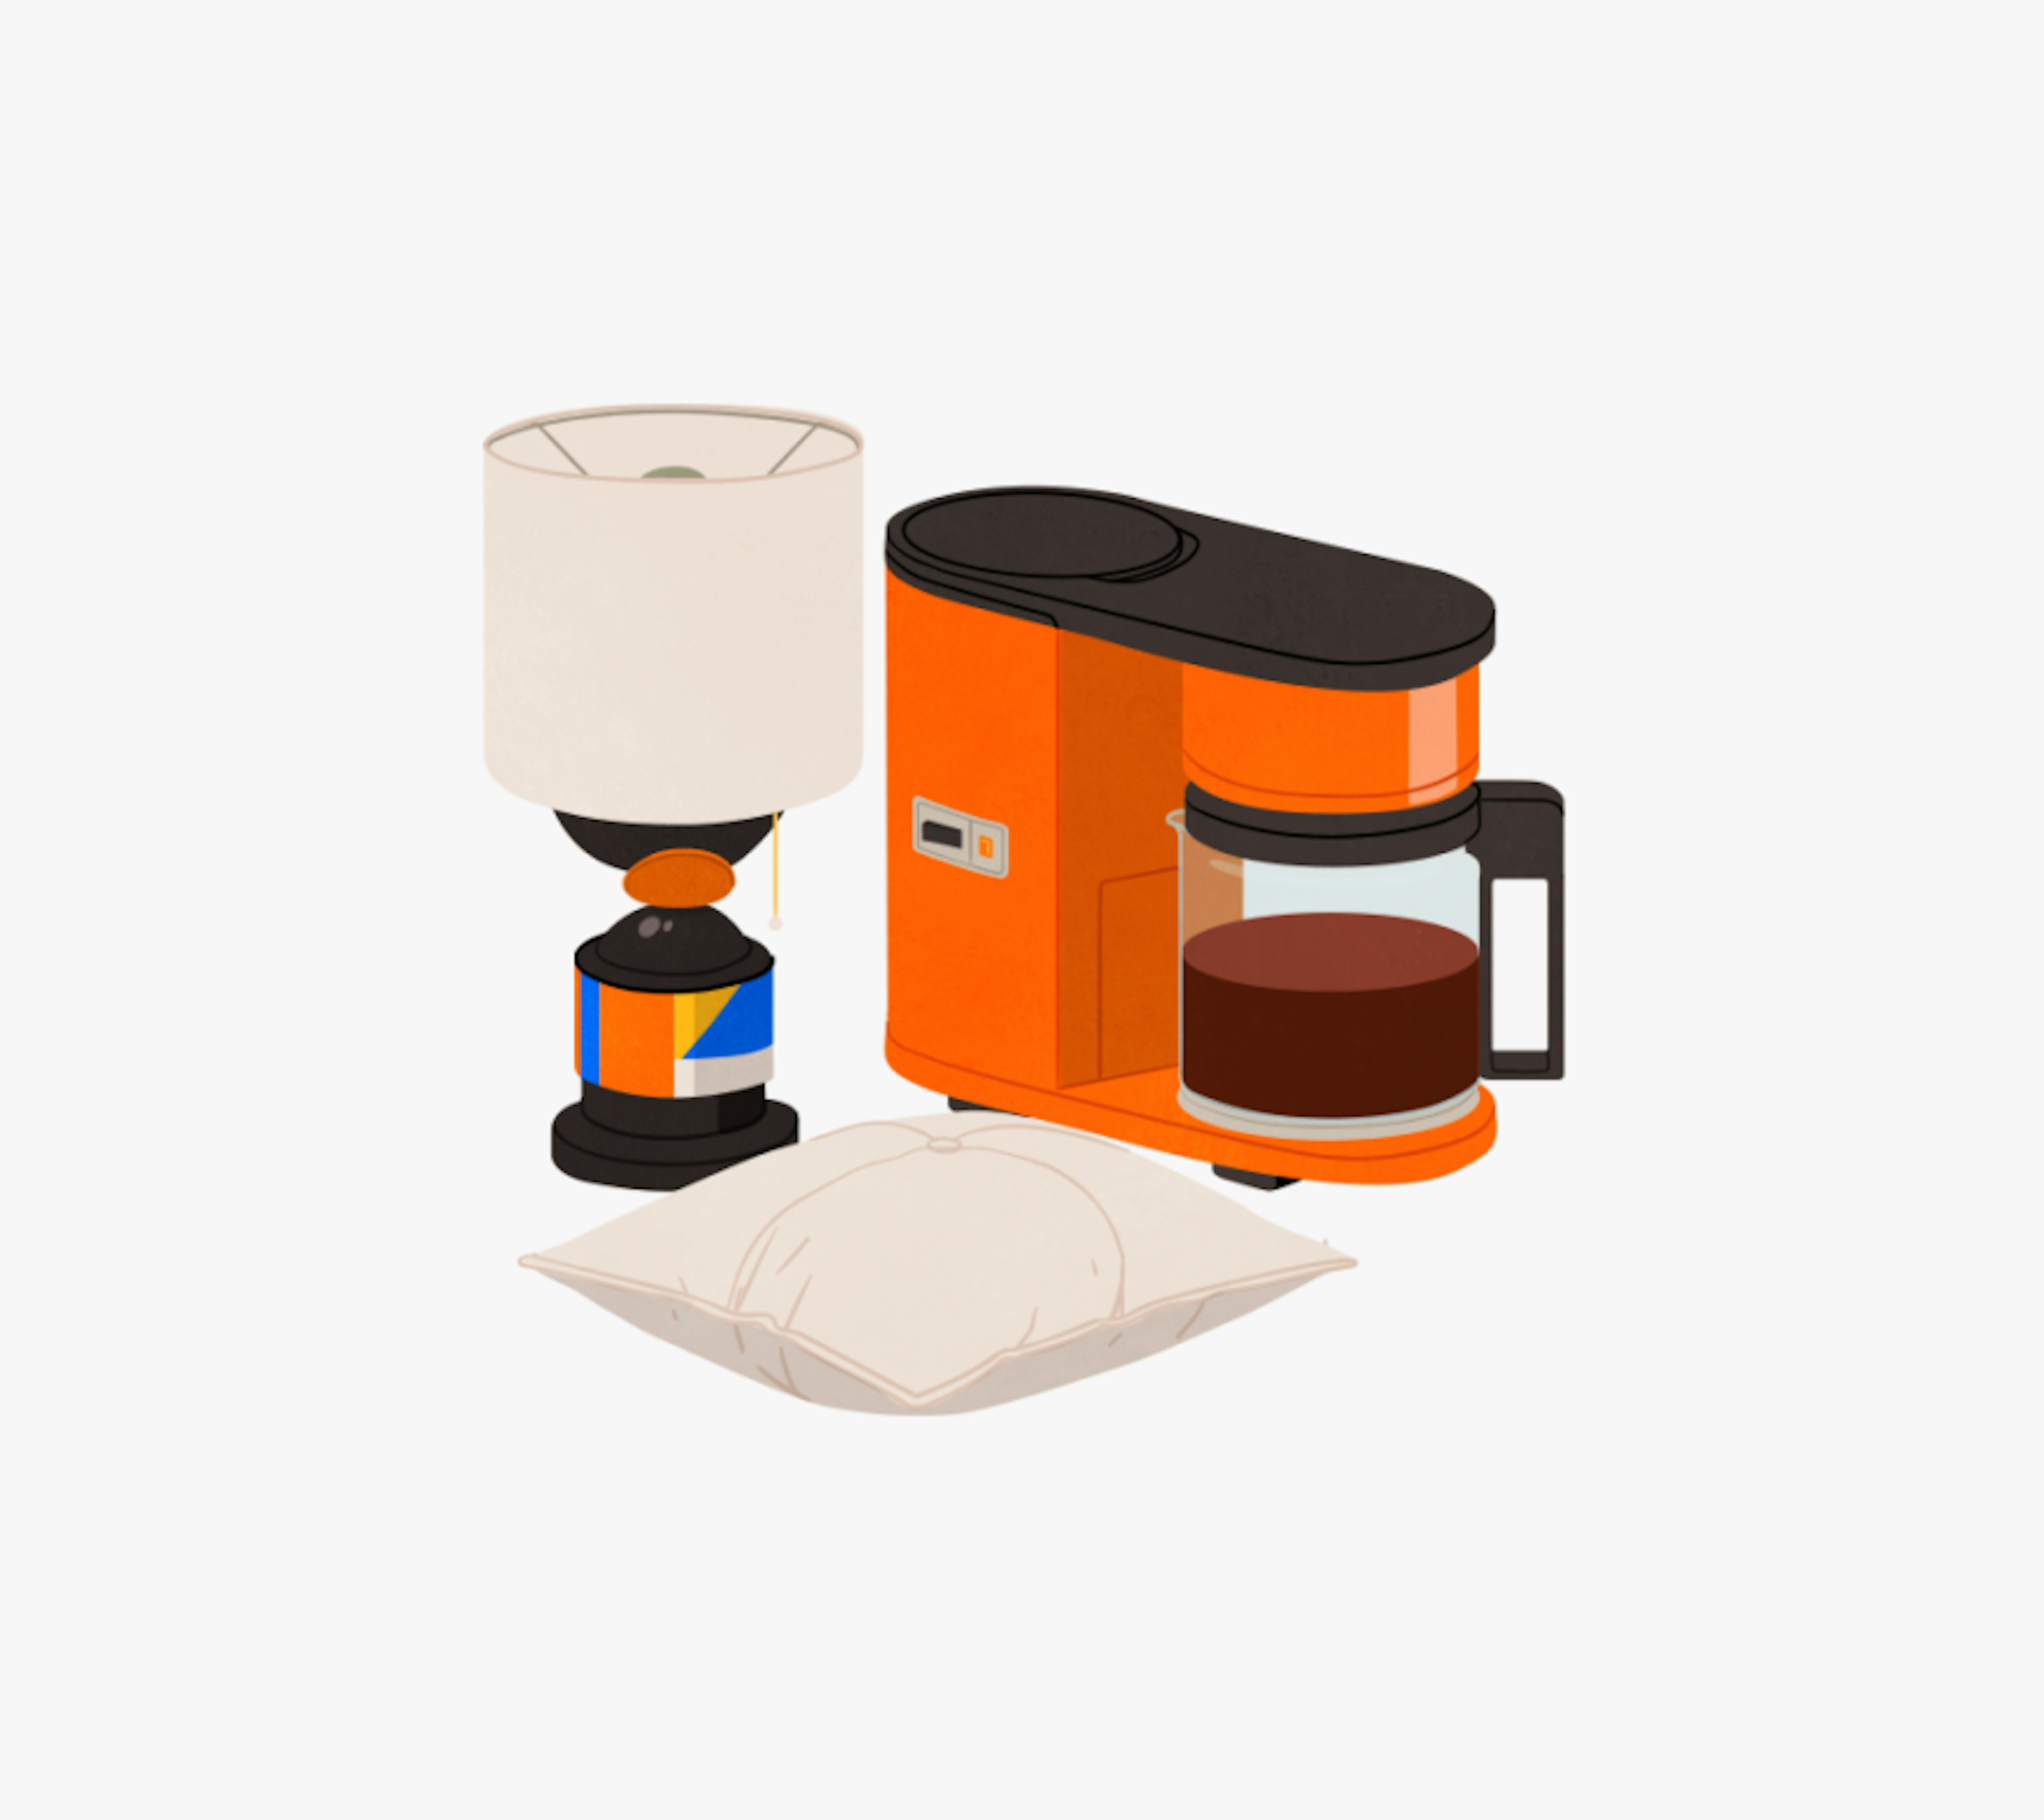 An orange and black coffee maker with a glass carafe, a white table lamp with a colorful base, and a white pillow are arranged together.